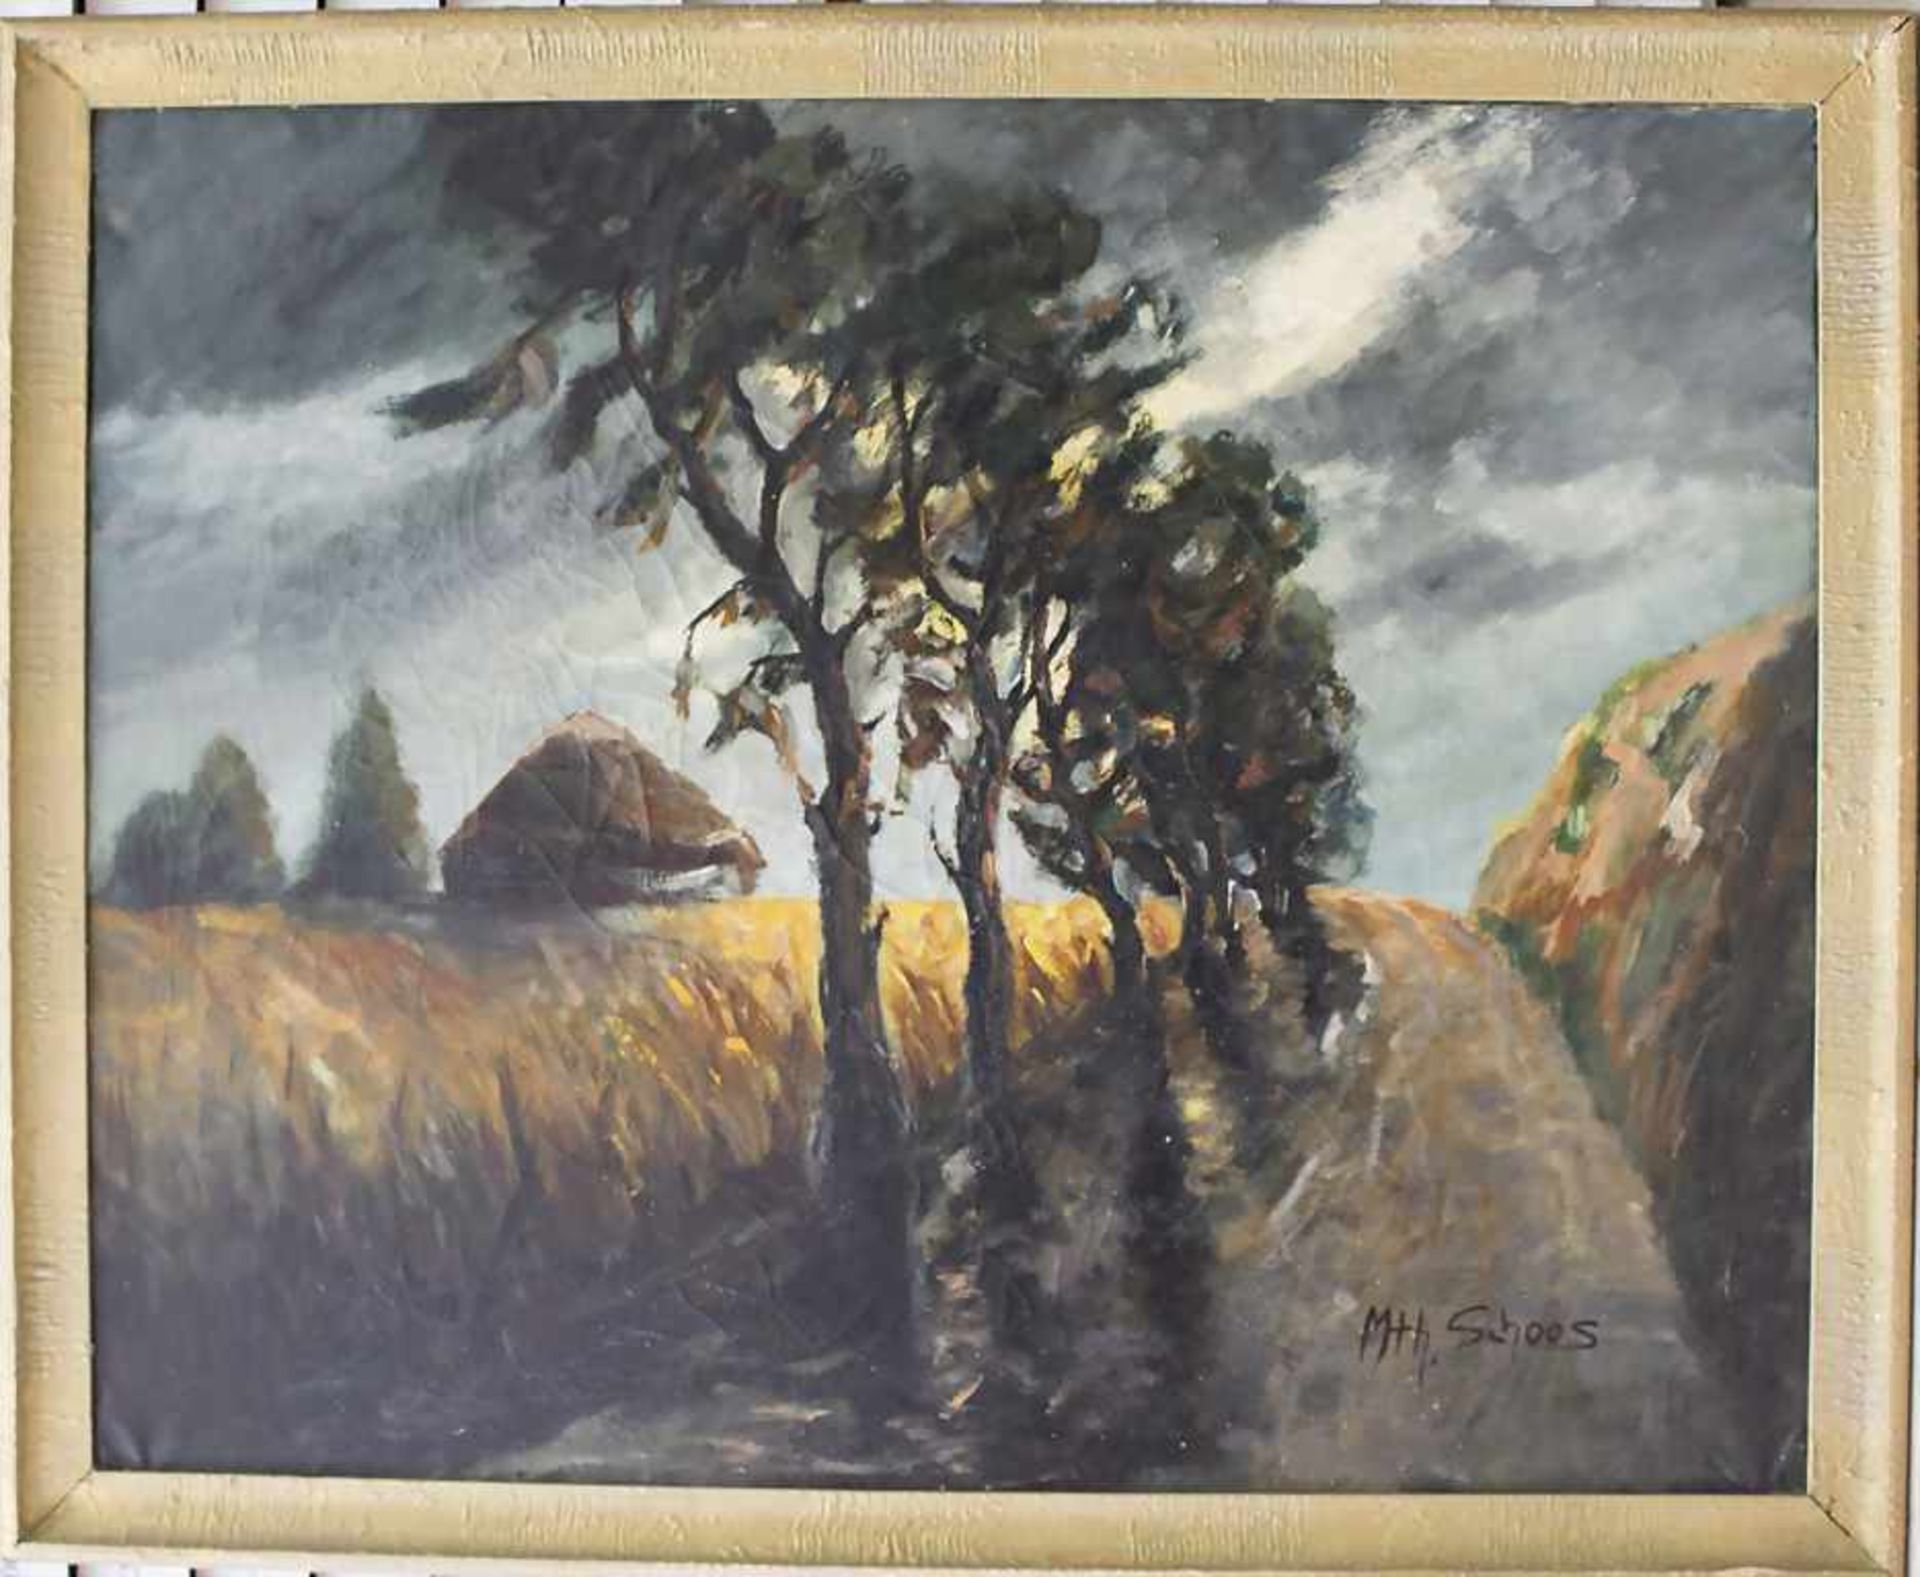 Mth. Schoos (20. Jh.), 'Kornfeld mit aufkommendem Gewitter' / 'A cornfield with upcoming storm'< - Image 2 of 5